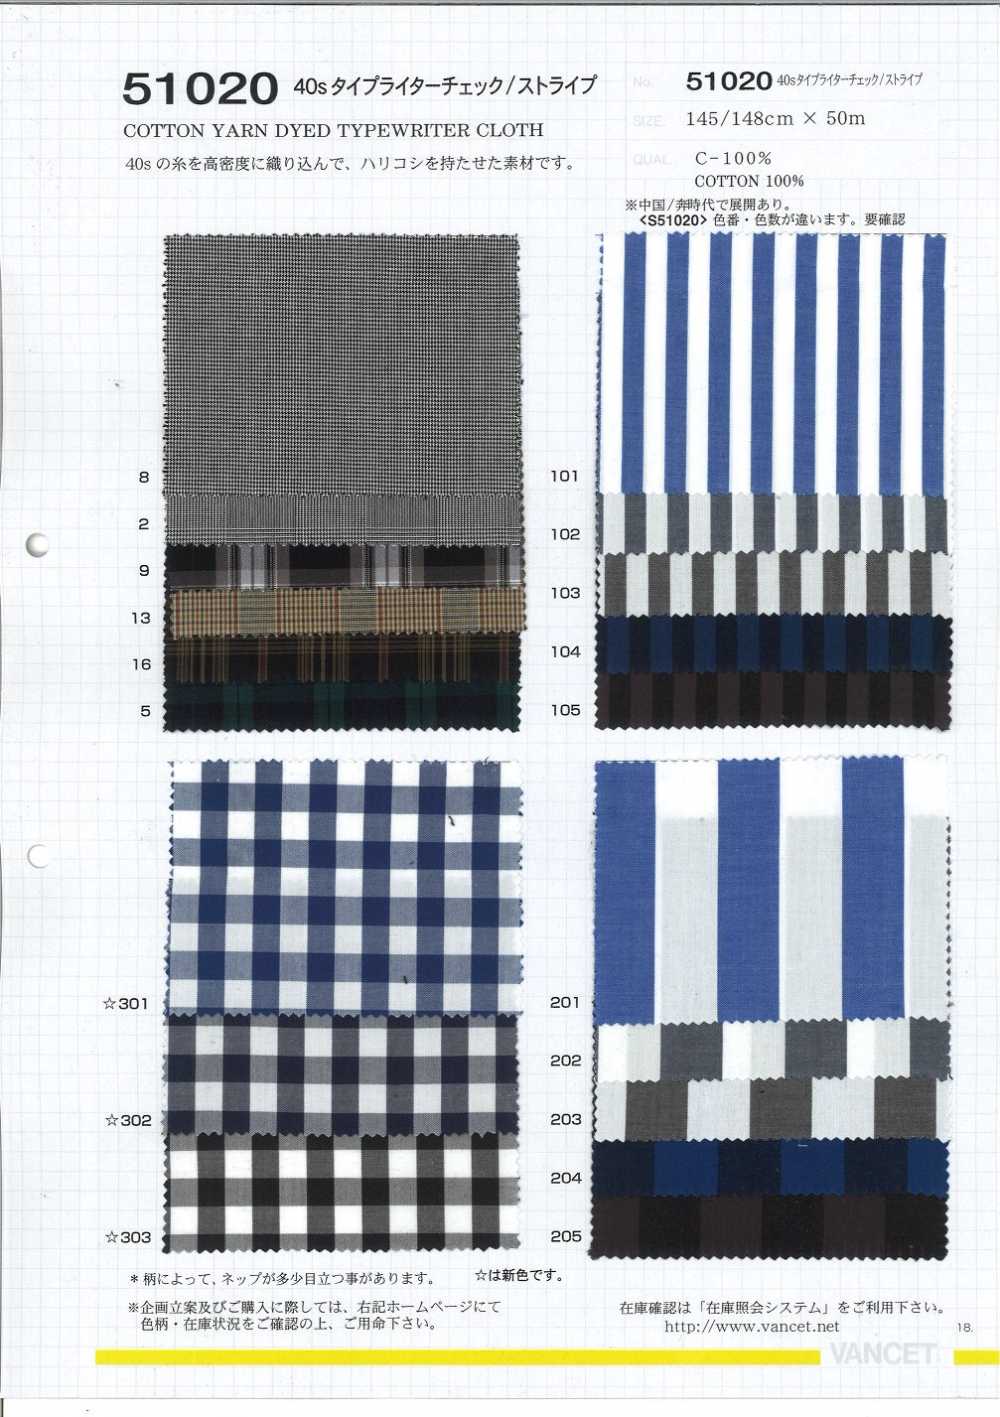 51020 40S Typewritter Cloth Check[Textile / Fabric] VANCET